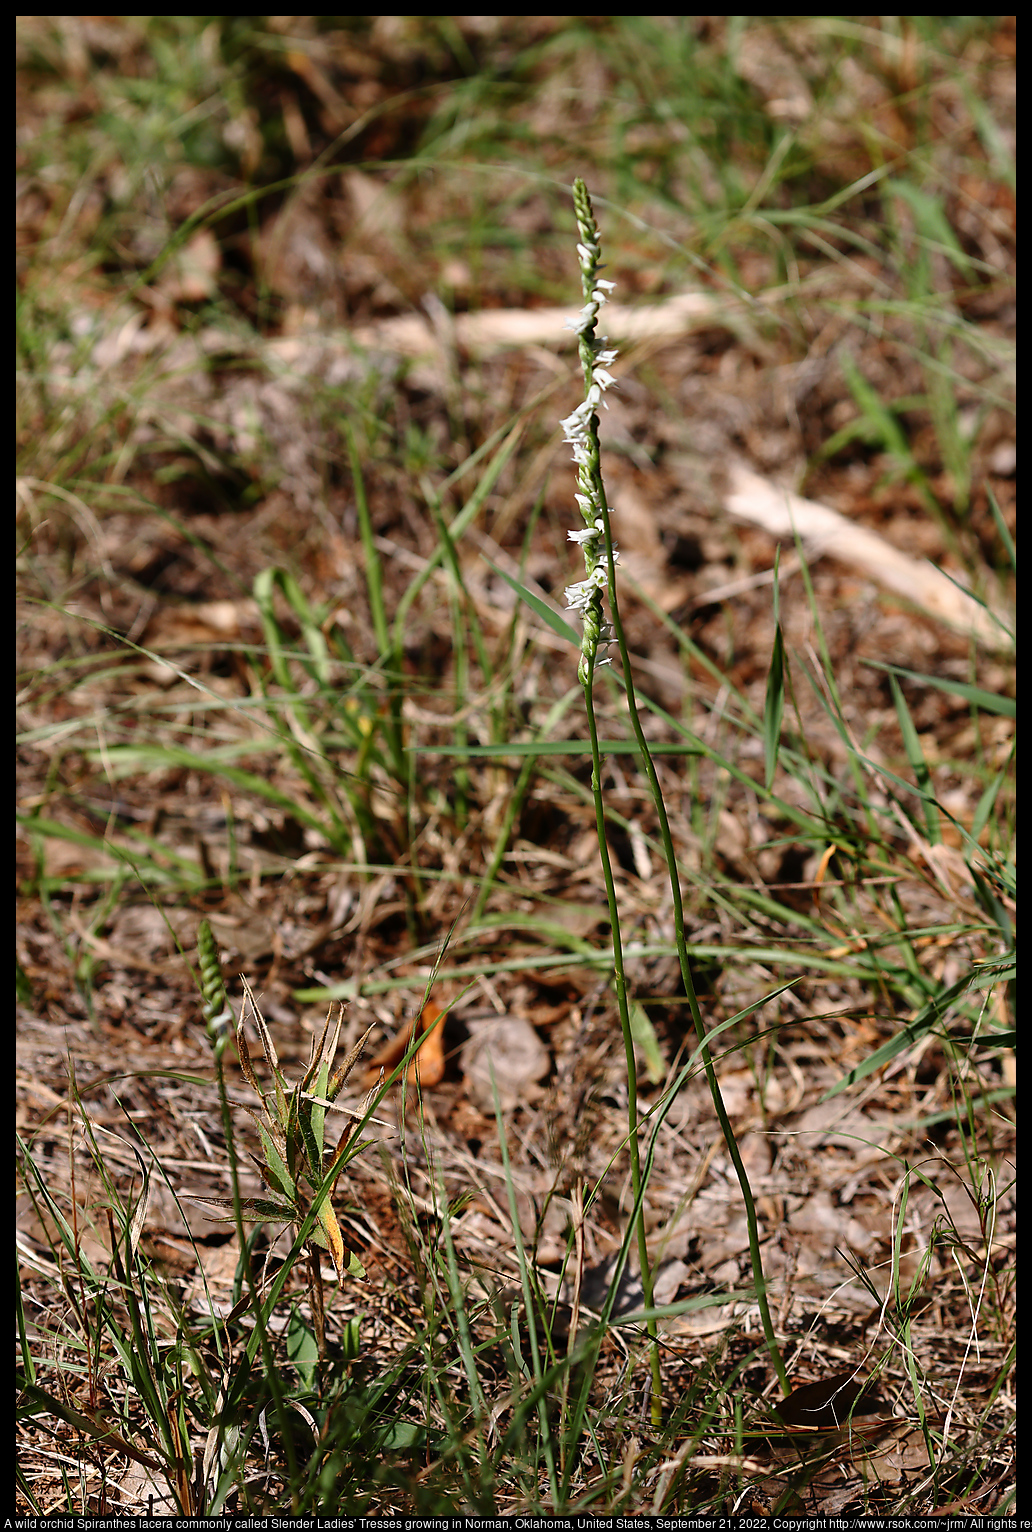 A wild orchid Spiranthes lacera commonly called Slender Ladies' Tresses growing in Norman, Oklahoma, United States, September 21, 2022